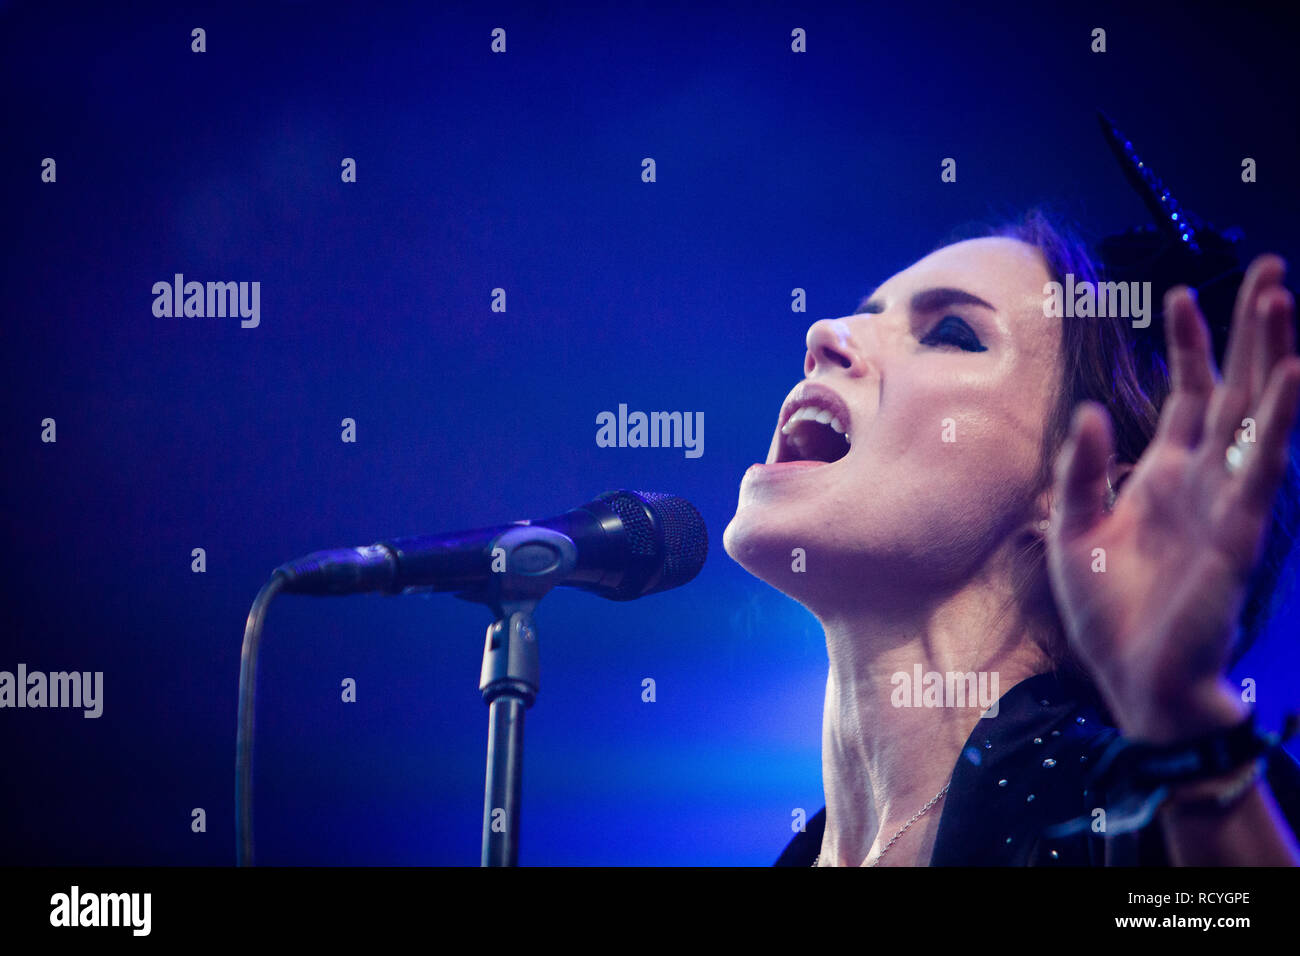 The Swedish singer and musician Nina Persson performs a live concert at the  Danish music festival Northside 2014 in Aarhus. Nina Persson also known as  the singer of the Swedish pop group